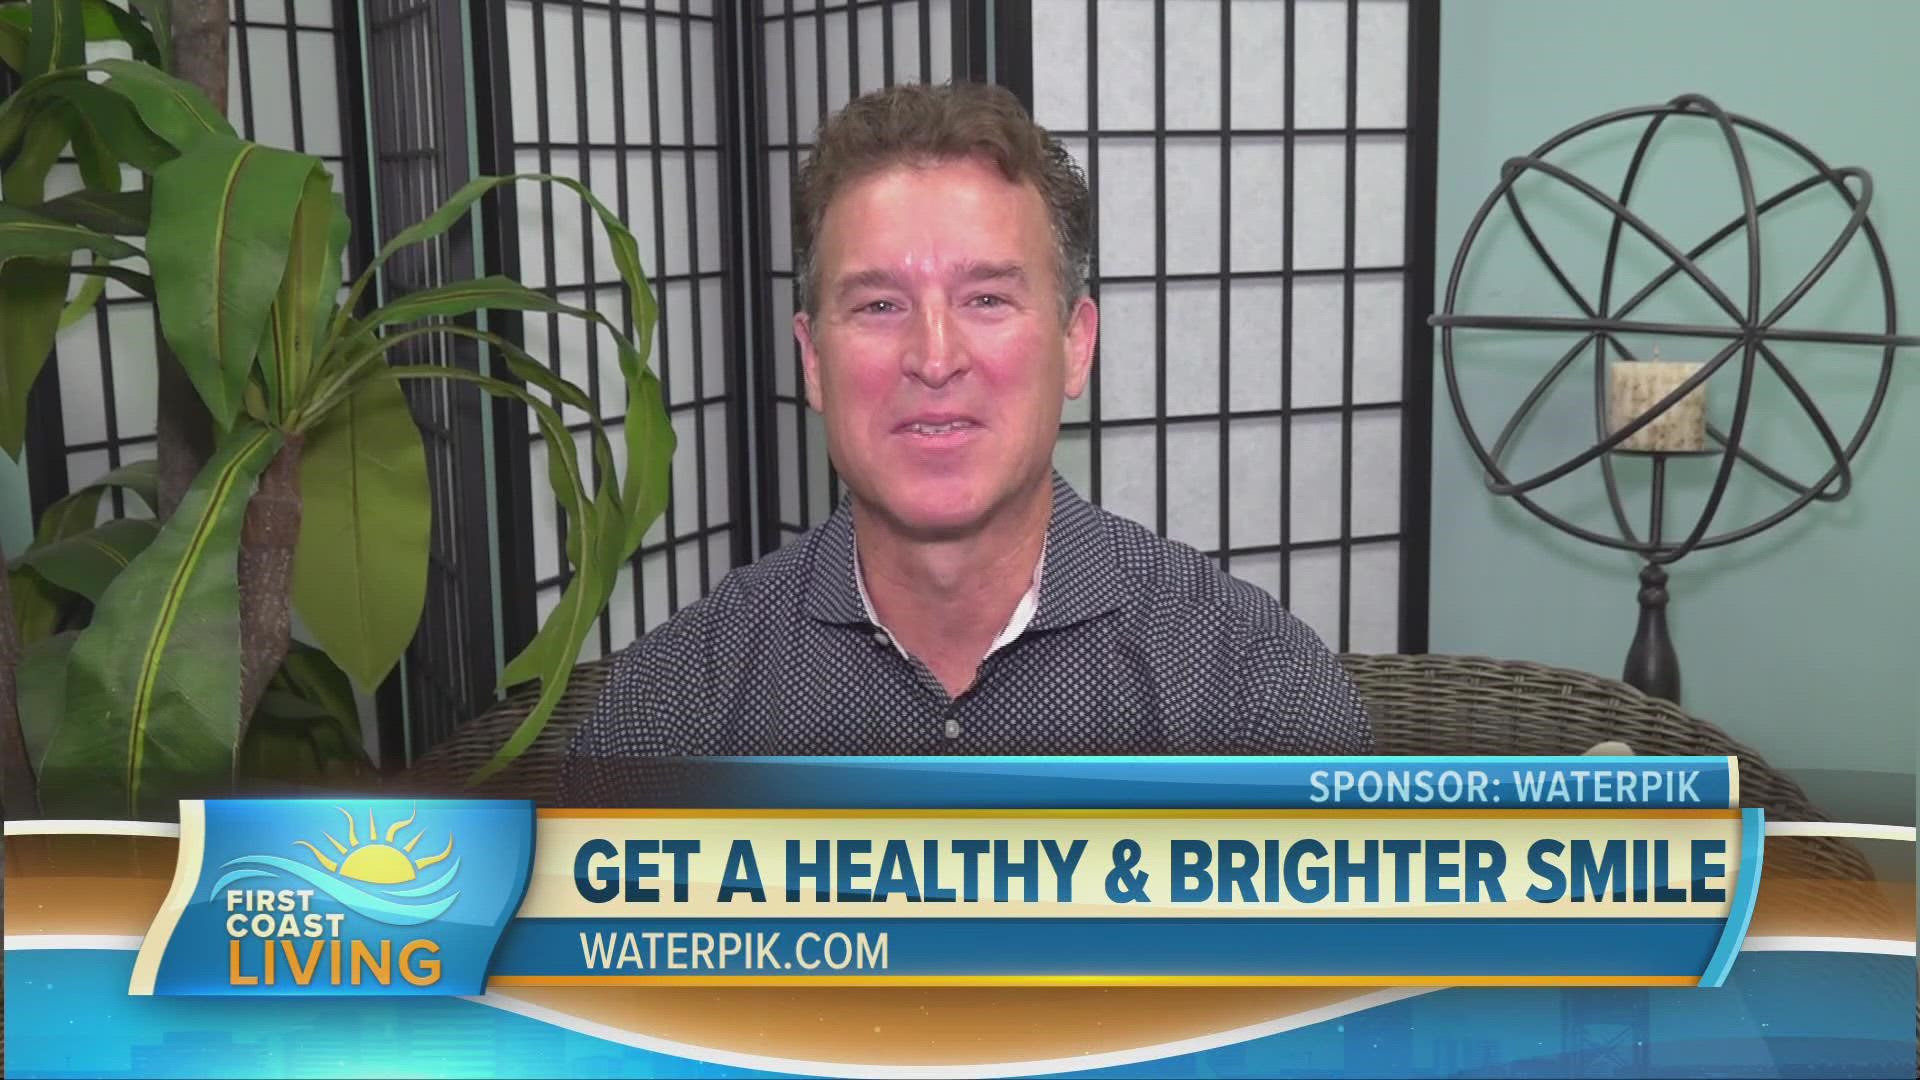 Dr. Chris Strandburg, Board Certified Dentist and Waterpik Spokesperson, shares tips for a healthy and brighter smile.